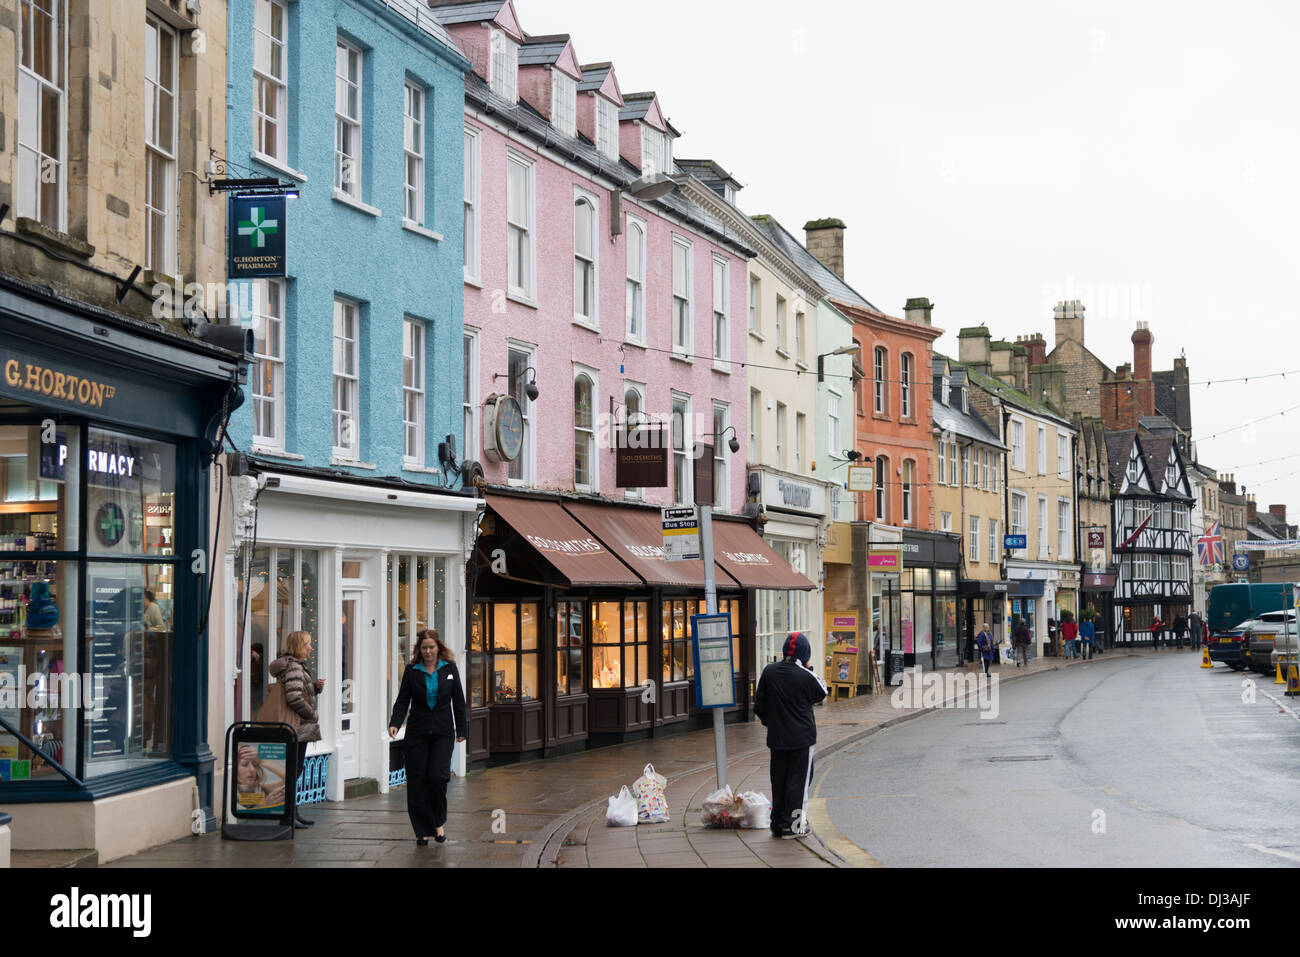 Buildings and shops in the High Street at Cirencester UK on wet day Stock Photo